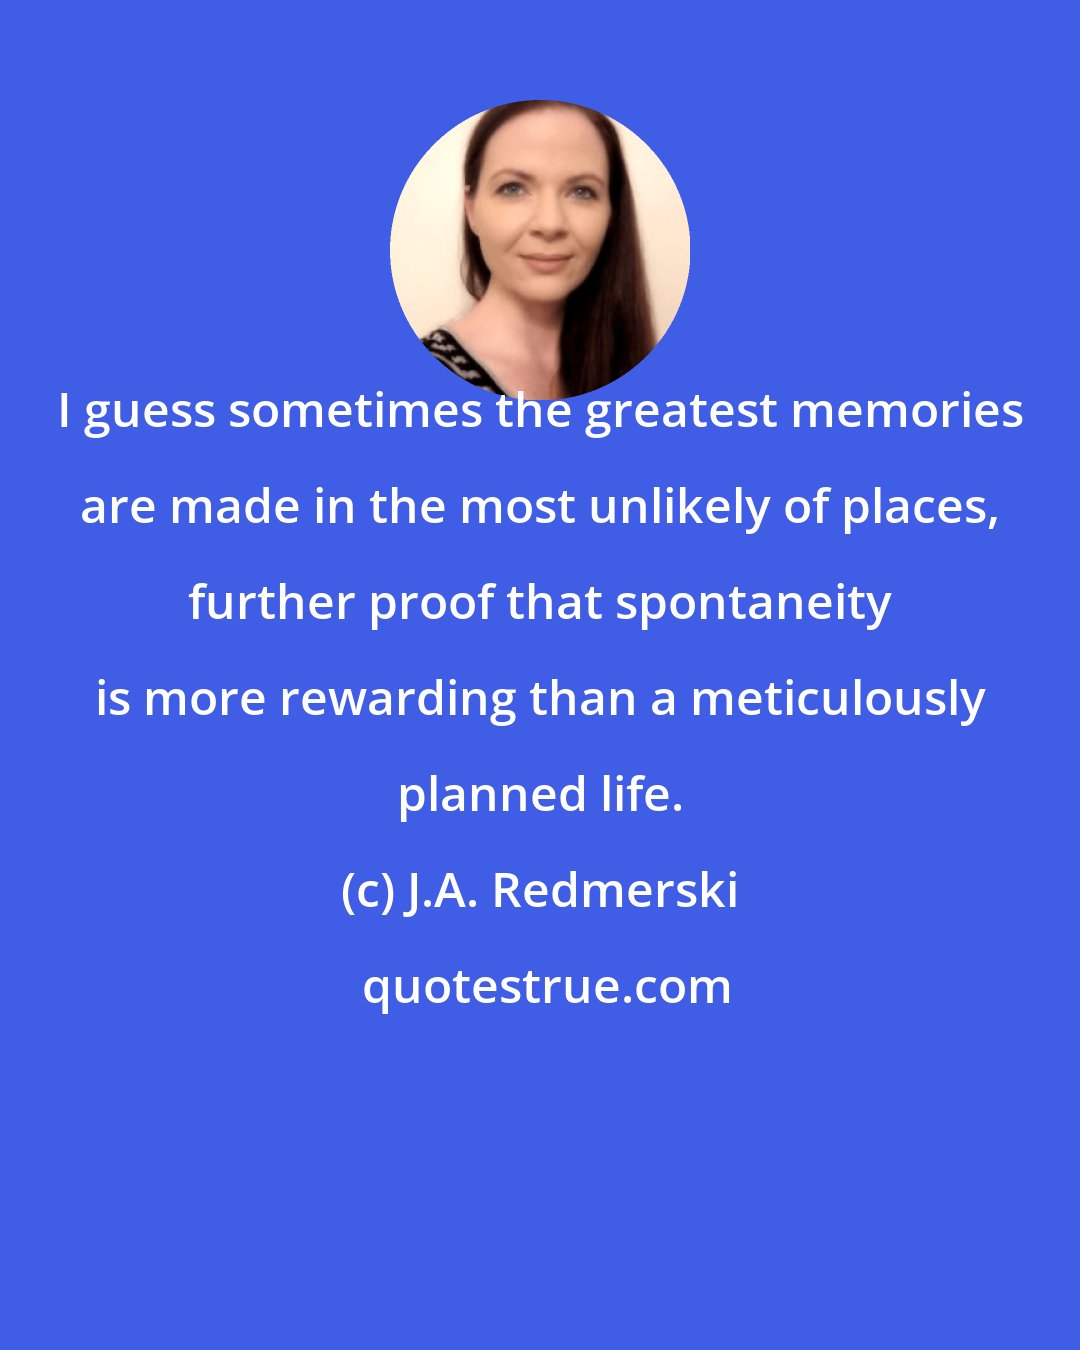 J.A. Redmerski: I guess sometimes the greatest memories are made in the most unlikely of places, further proof that spontaneity is more rewarding than a meticulously planned life.